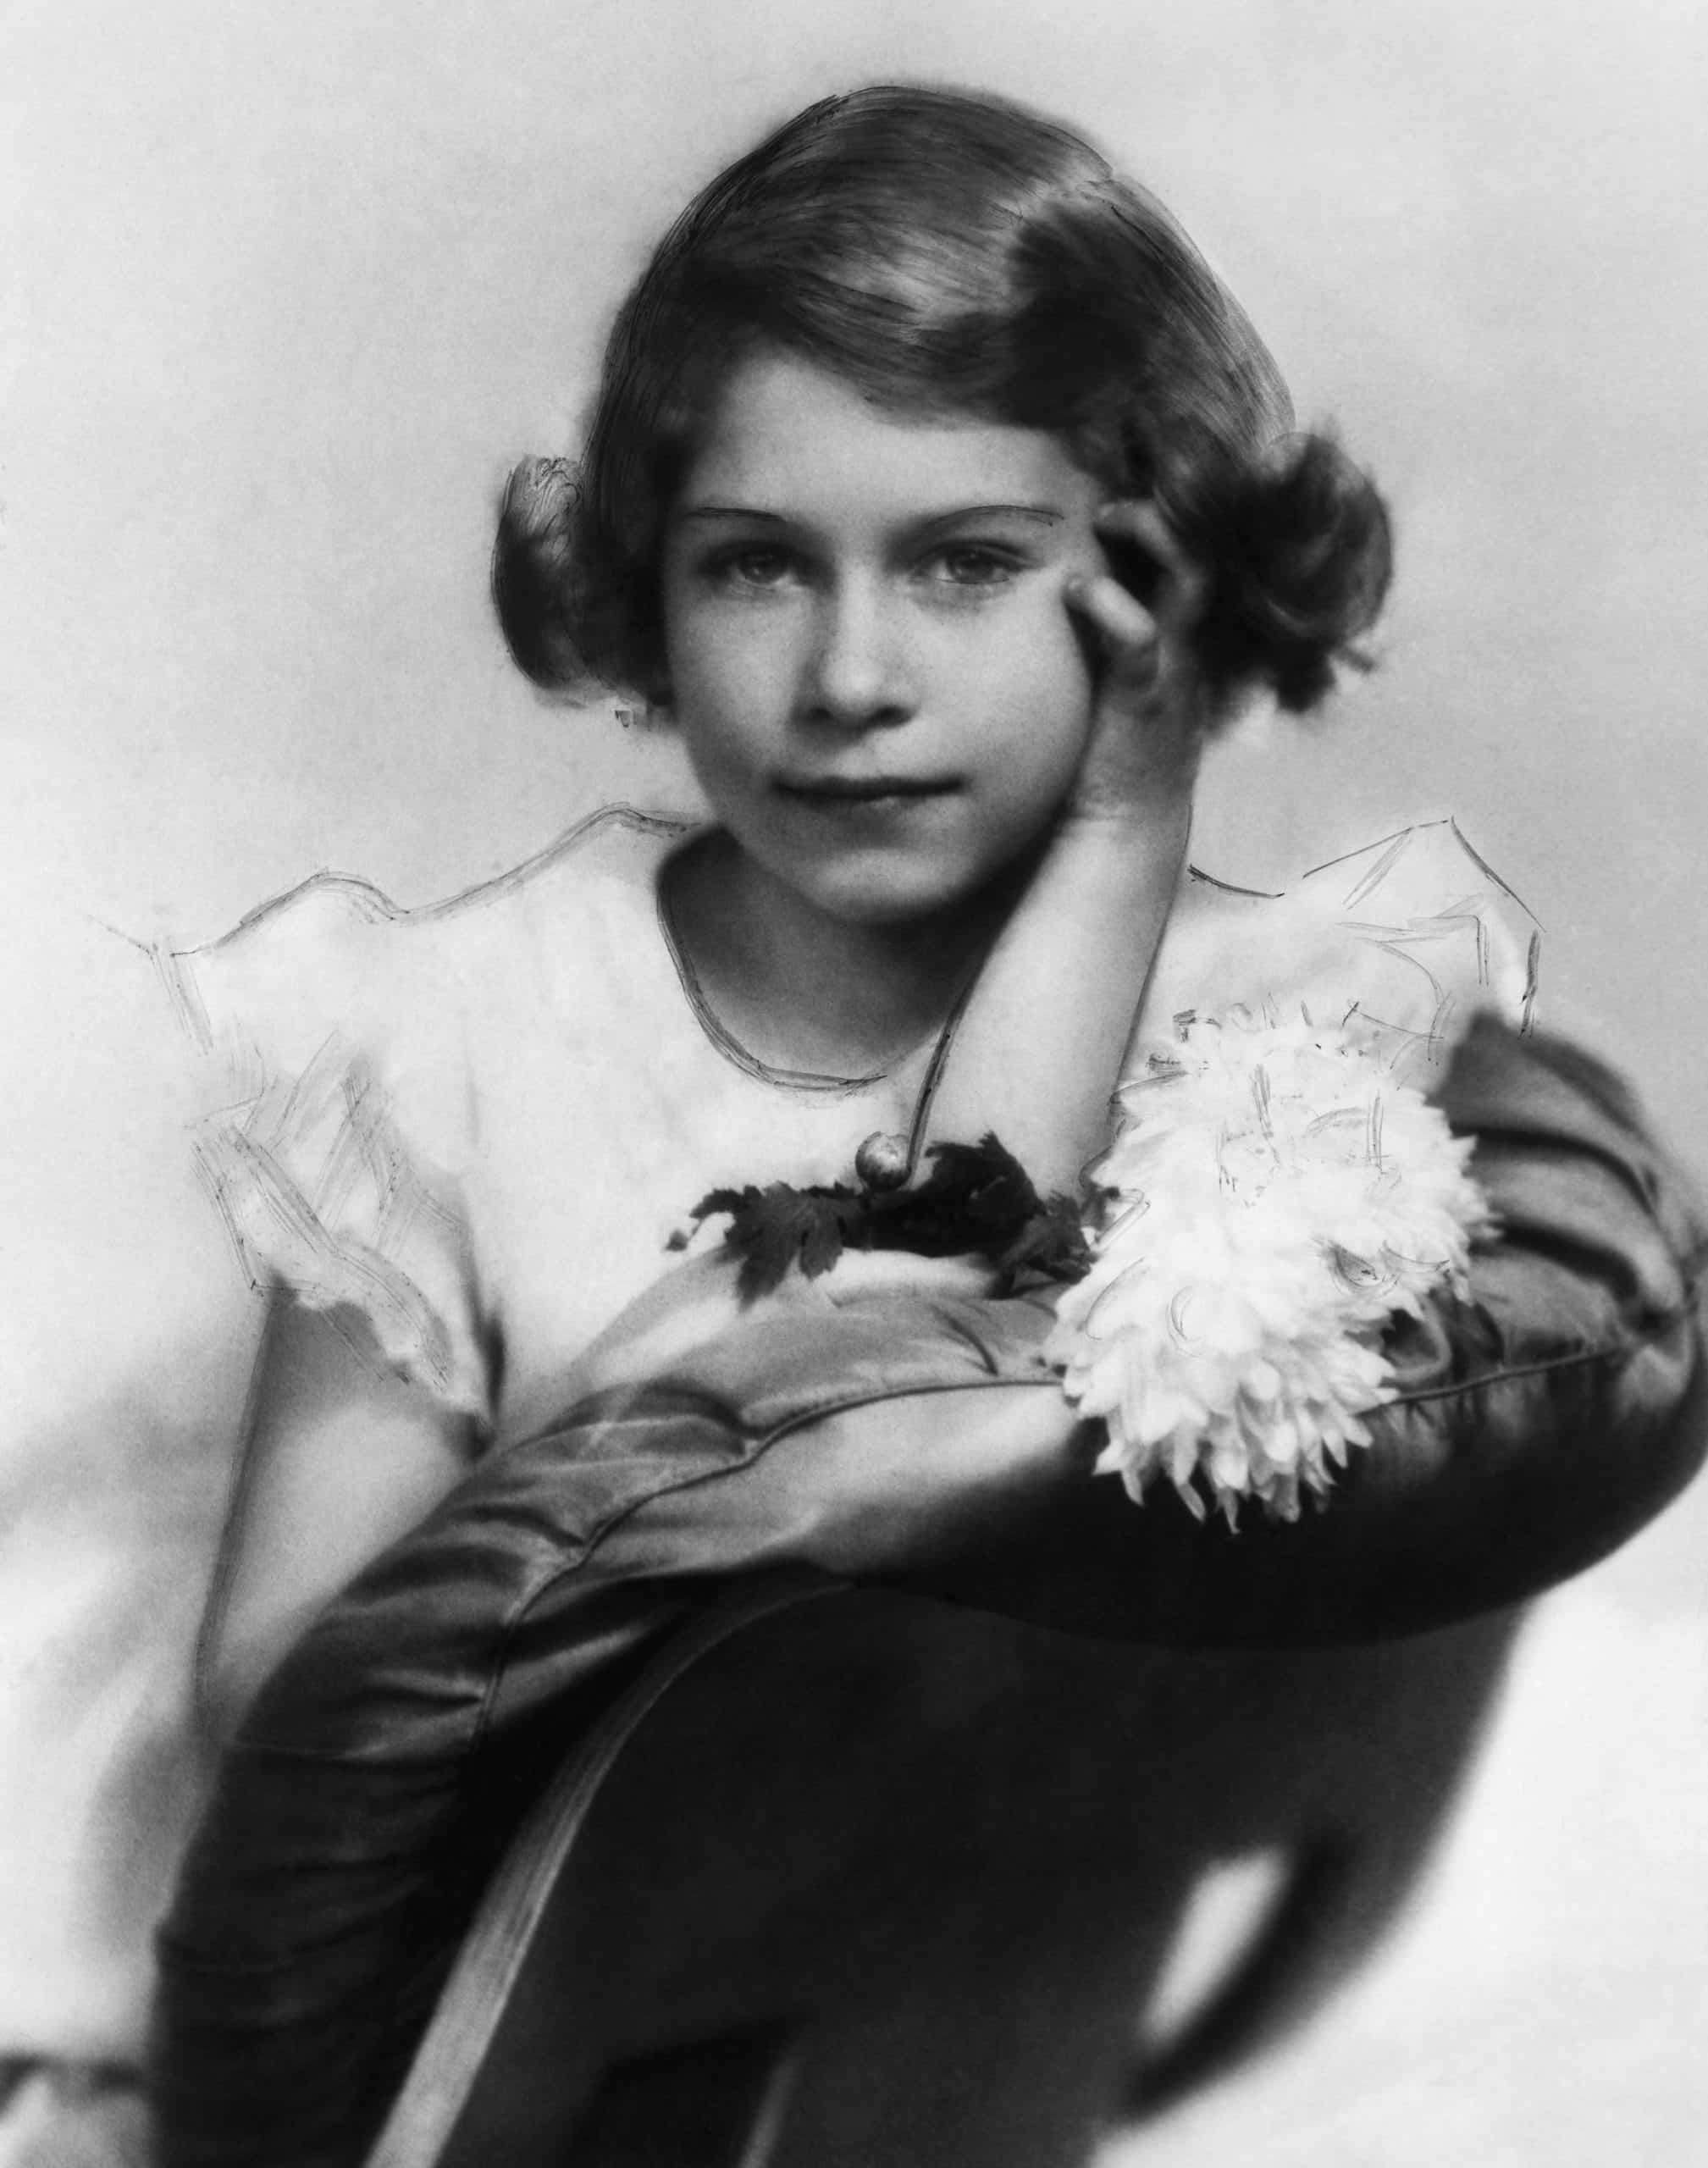 British Royalty. Future Queen of England Princess Elizabeth on her tenth birthday, April 21, 1936